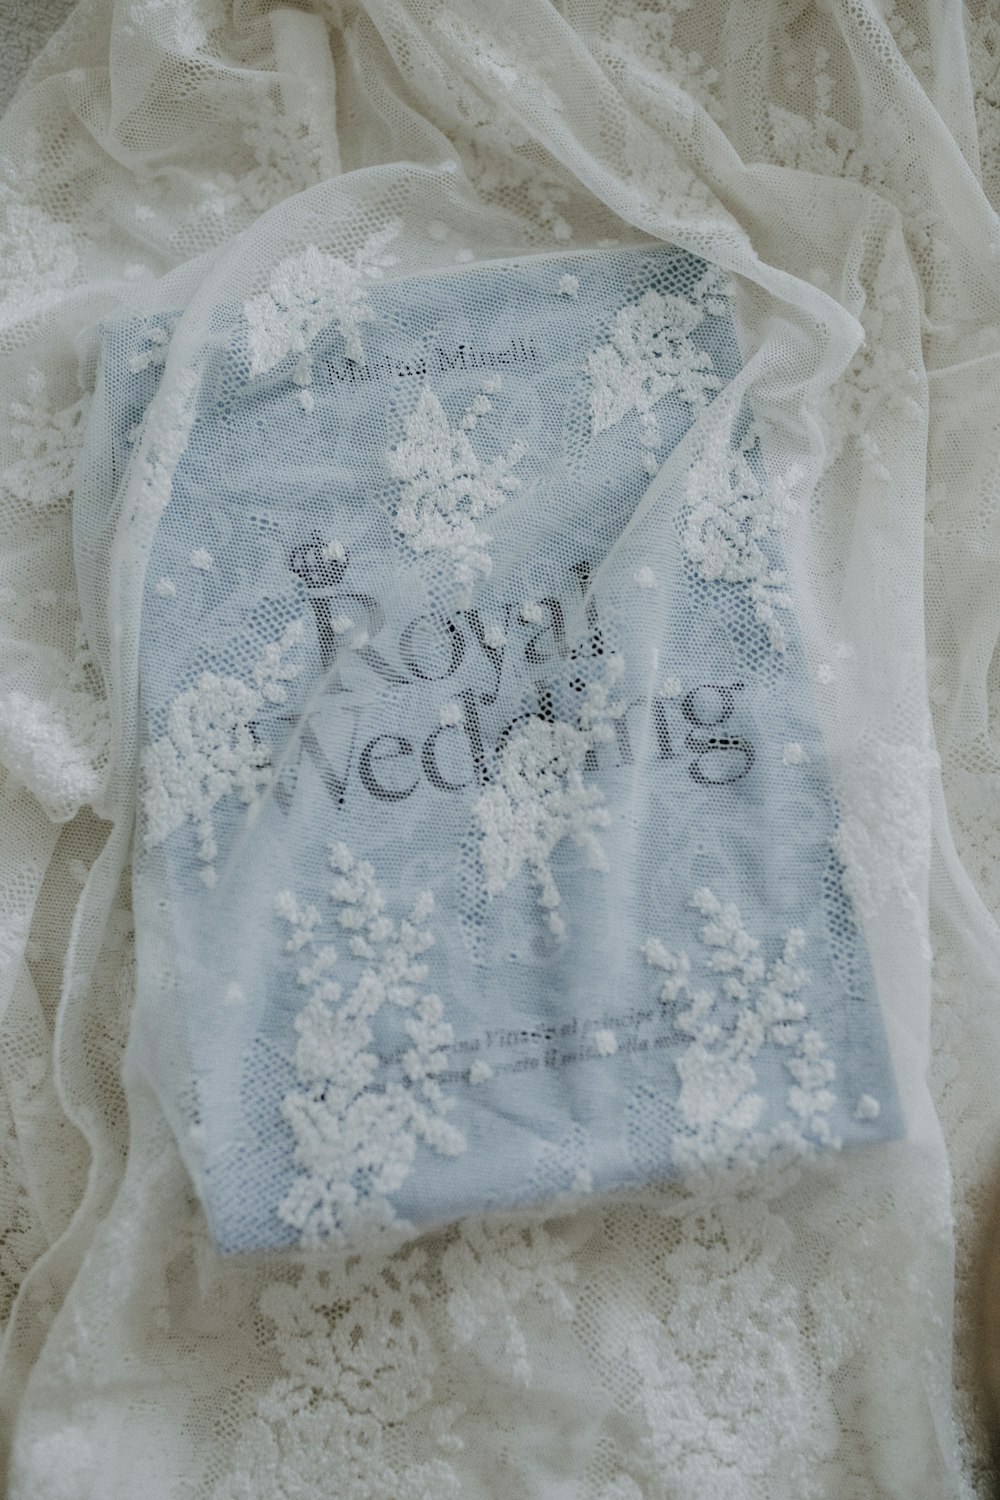 a royal wedding book laying on a bed